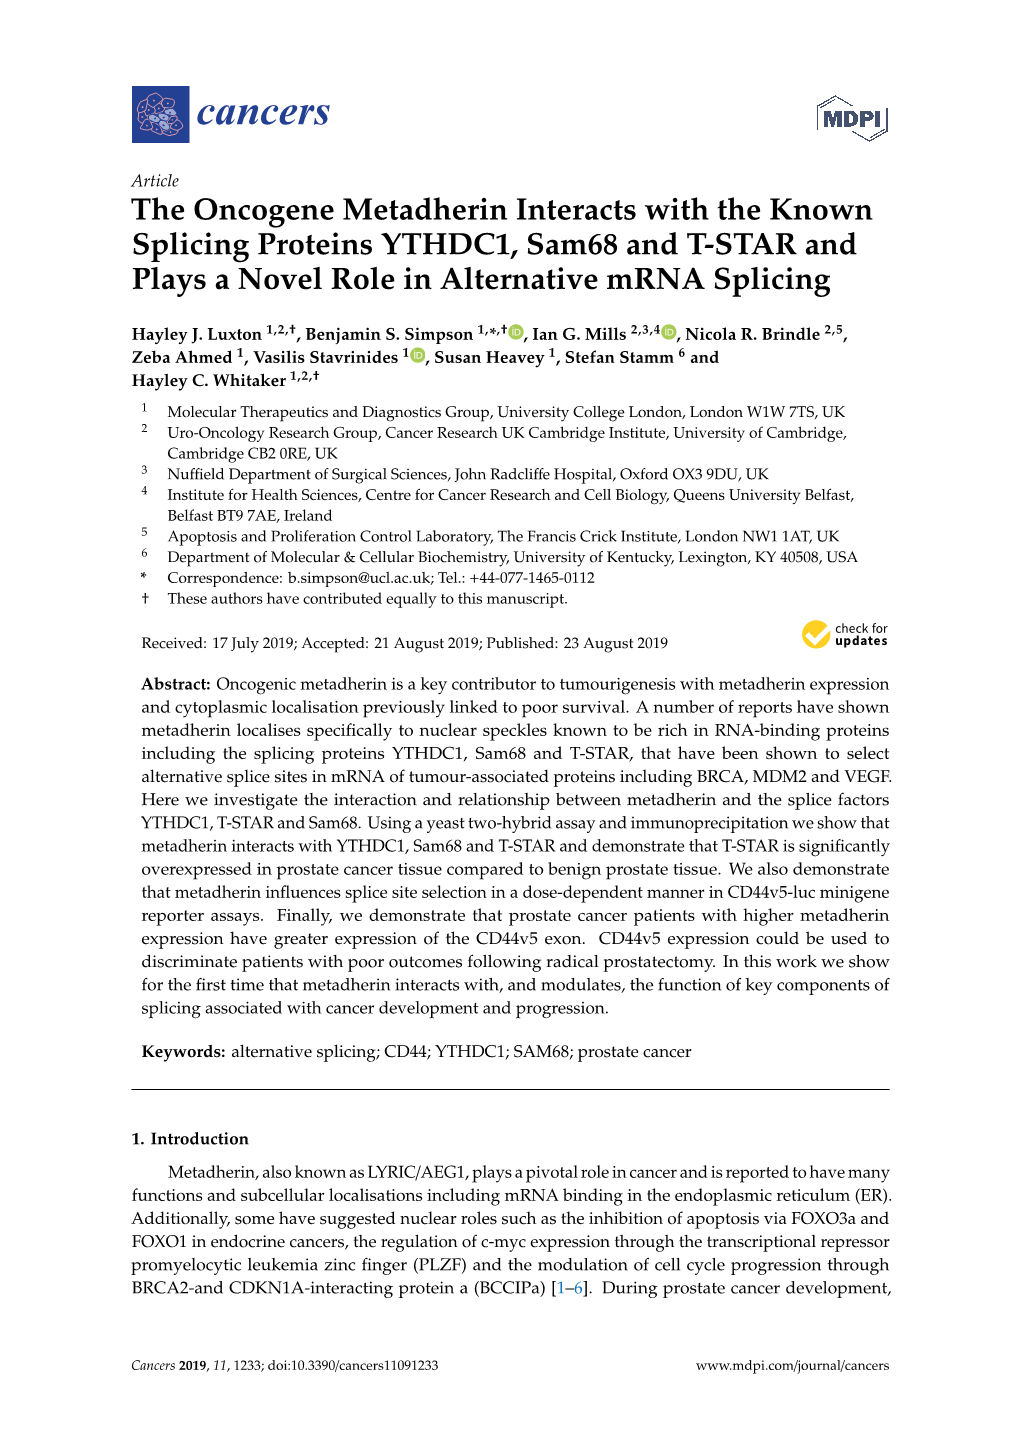 The Oncogene Metadherin Interacts with the Known Splicing Proteins YTHDC1, Sam68 and T-STAR and Plays a Novel Role in Alternative Mrna Splicing